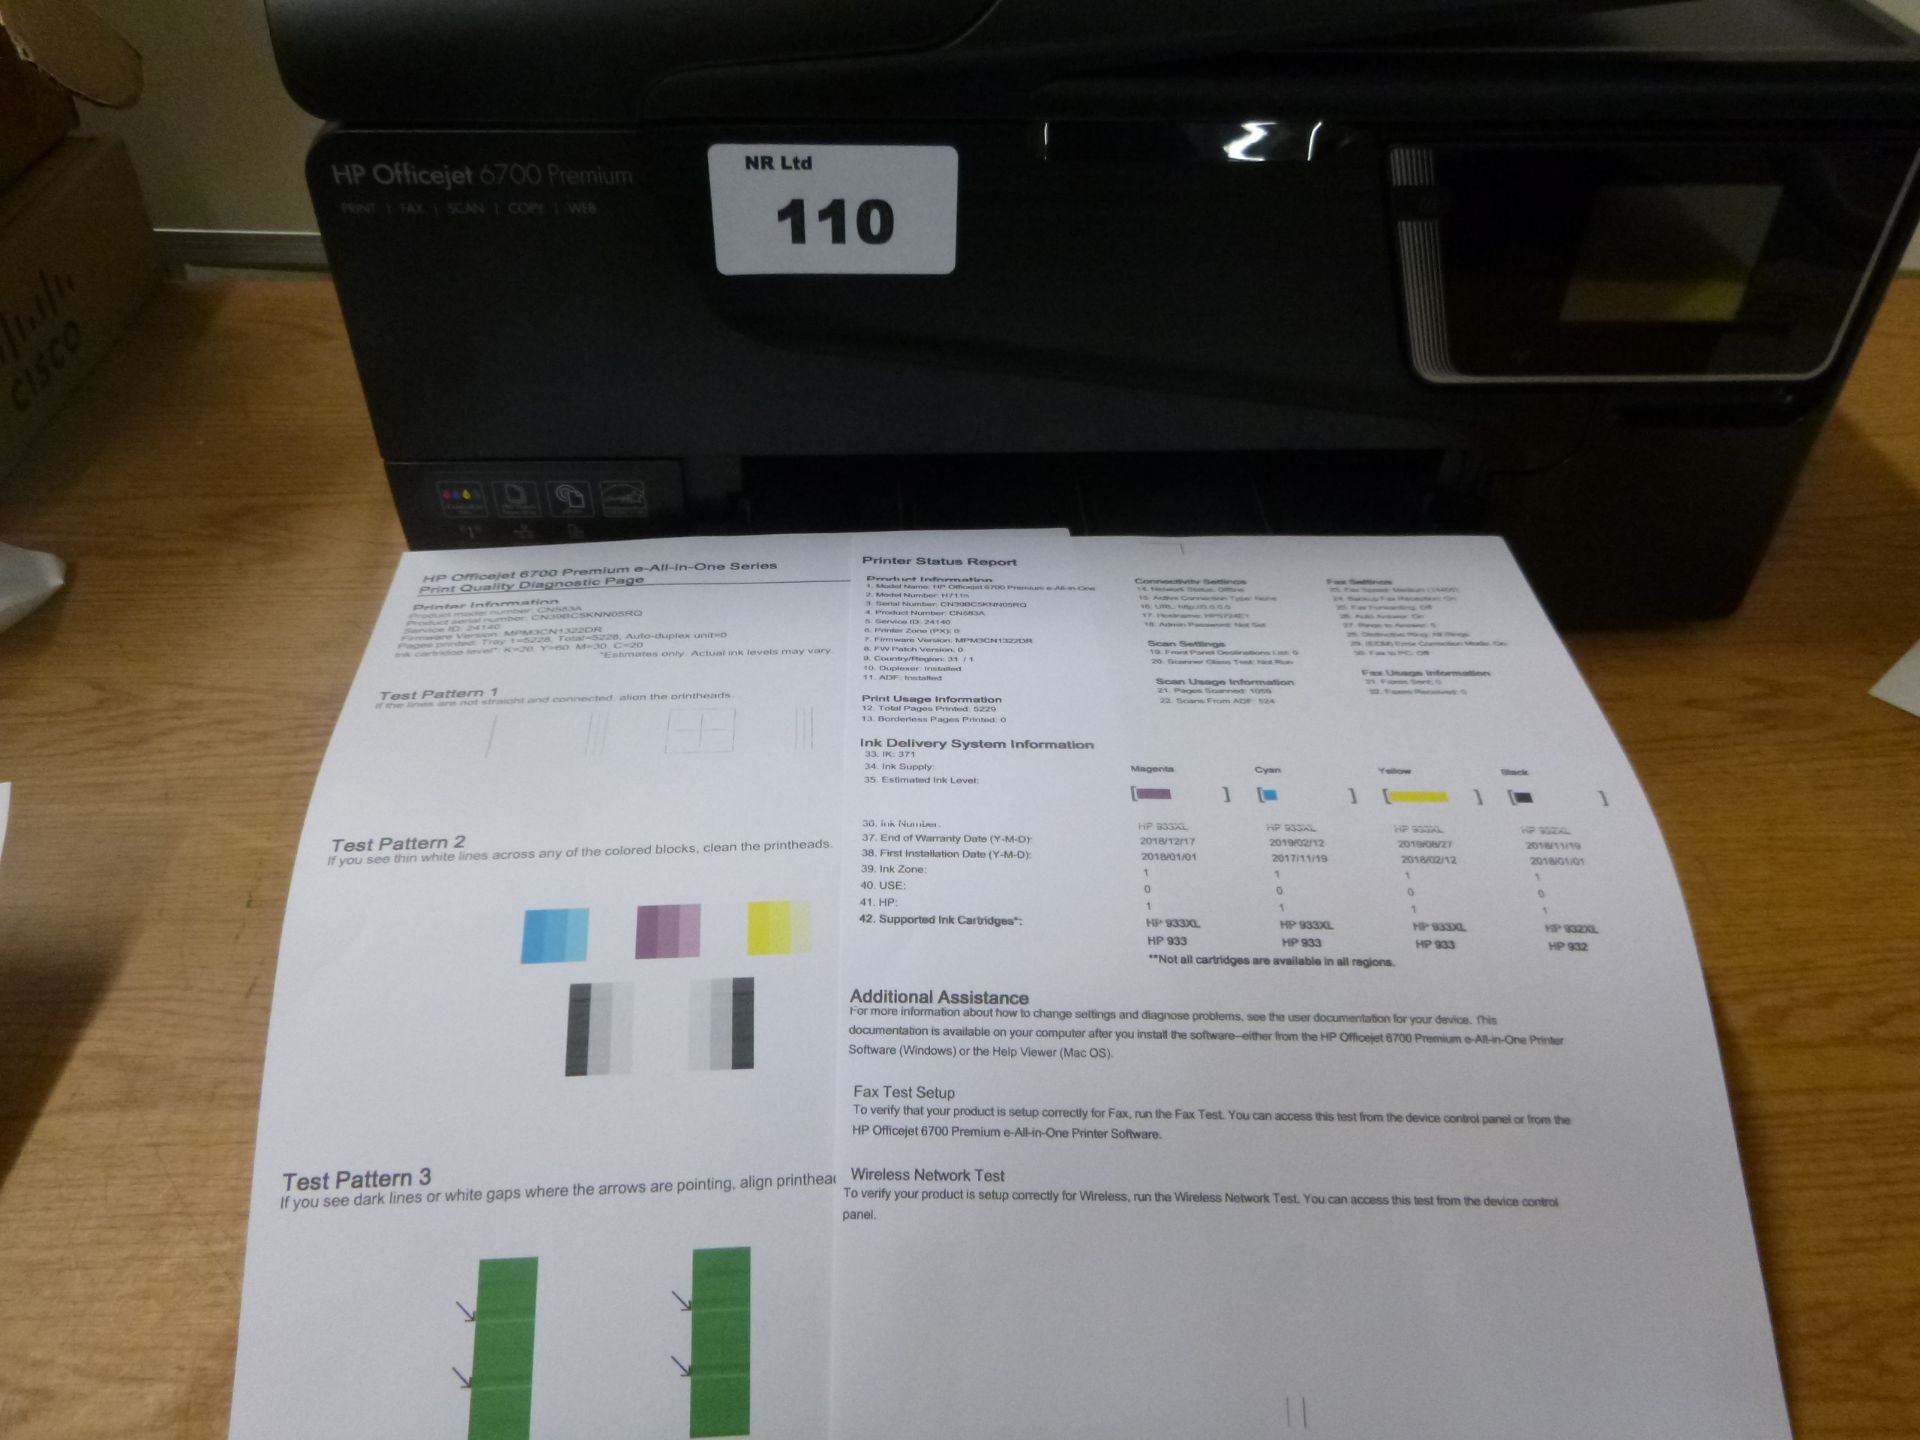 HP OFFICEJET 6700 PREMIUM COLOUR MULTIFUNCTION PRINTER, PRINT/FAX/SCAN/COPY/WEB. WITH PSU AND TEST - Image 2 of 2